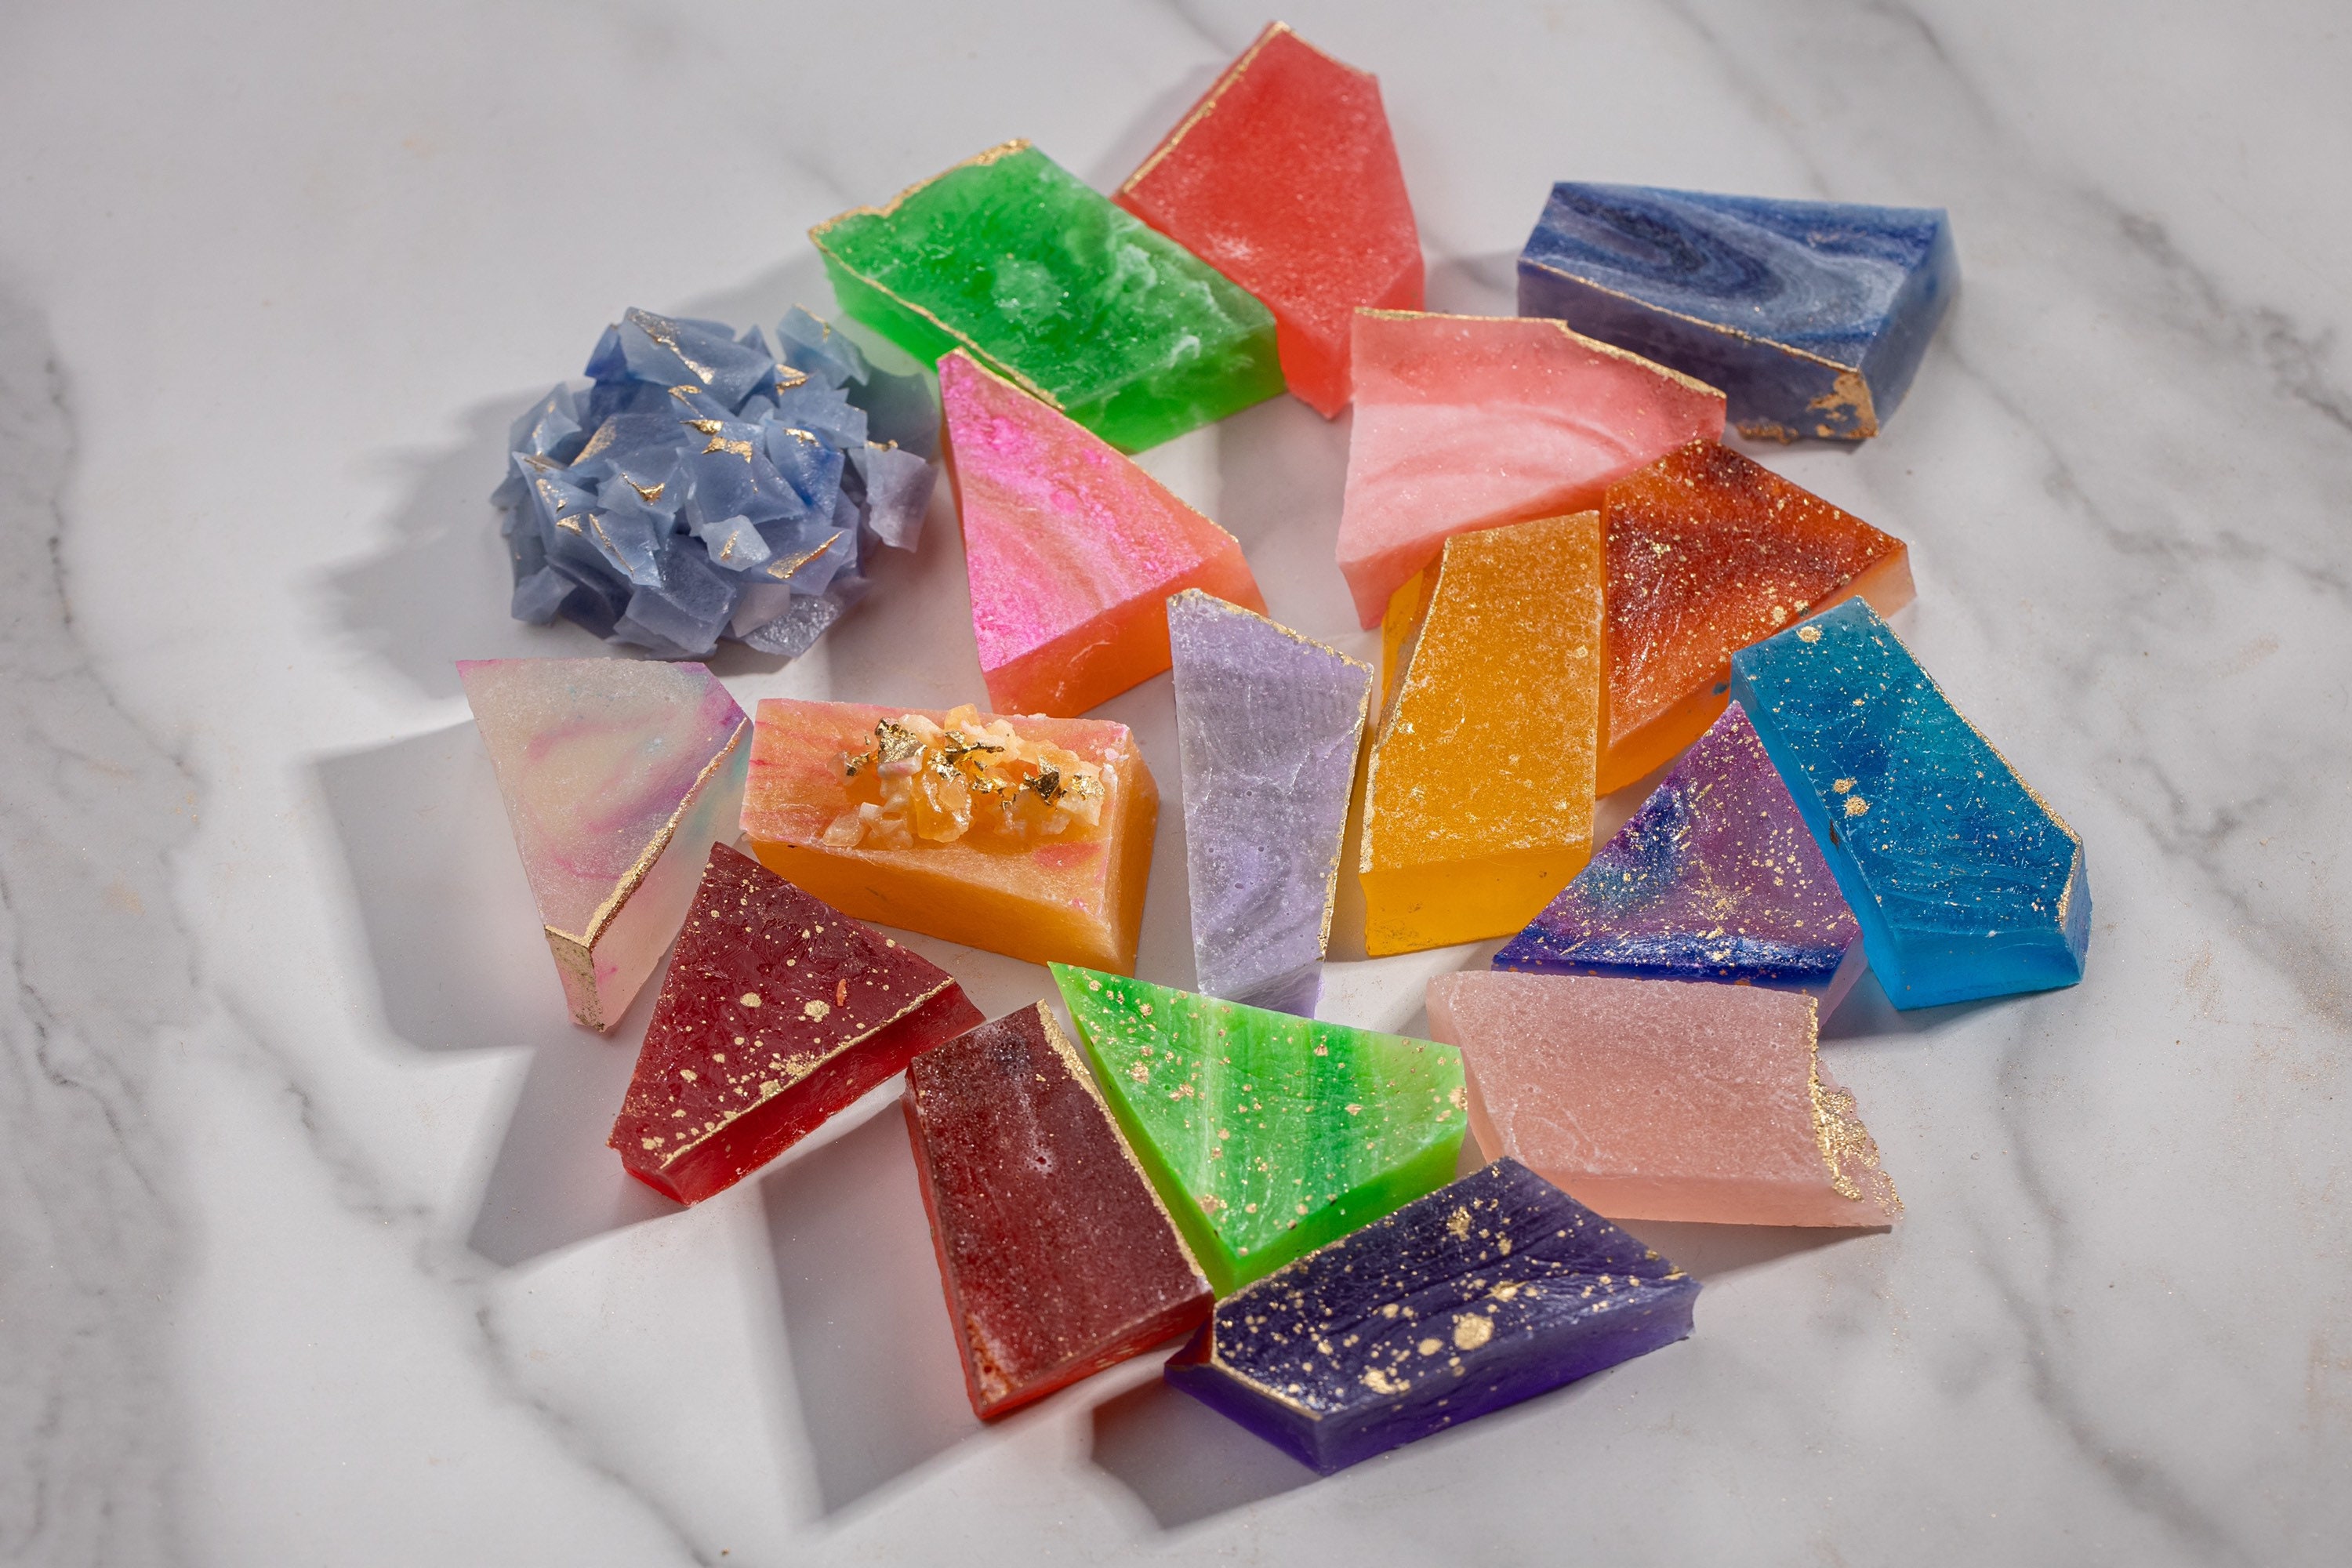 Replying to @hutham321 very excited for these ones! #crystalcandy #edi, making crystal candy